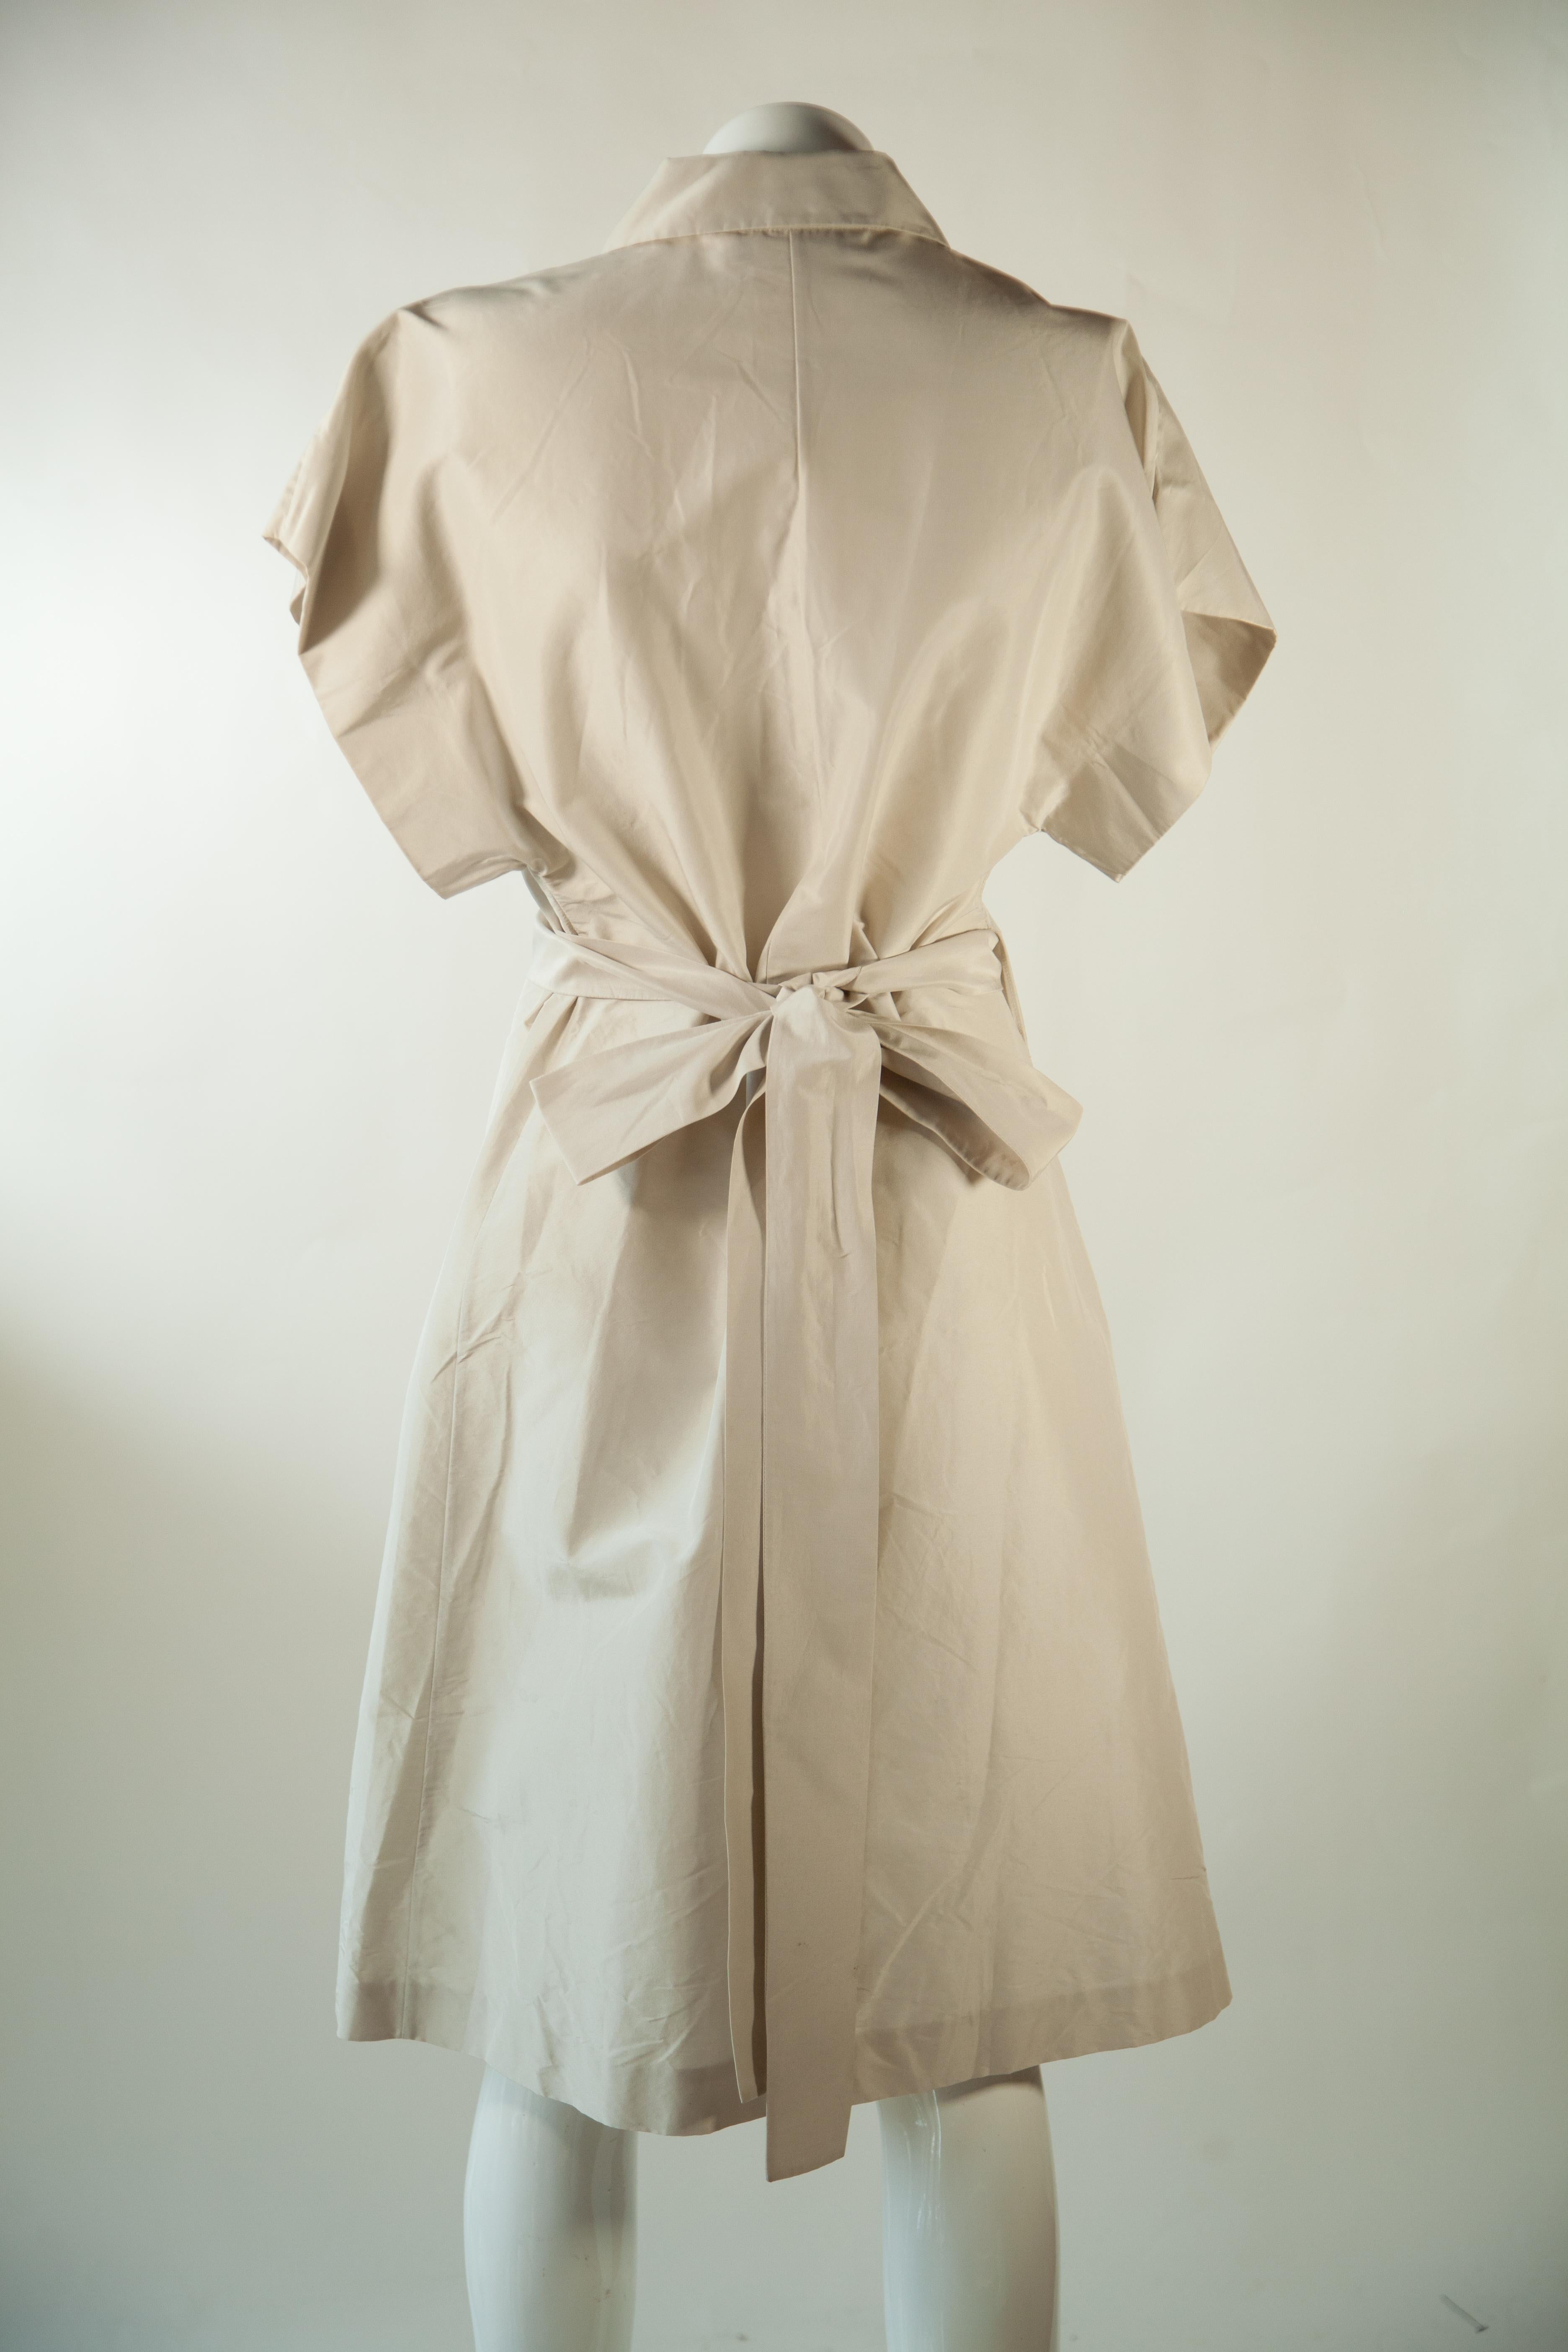 Yves Saint Laurent Rive Gauche White Crepe Wrap Dress  In Excellent Condition For Sale In Kingston, NY